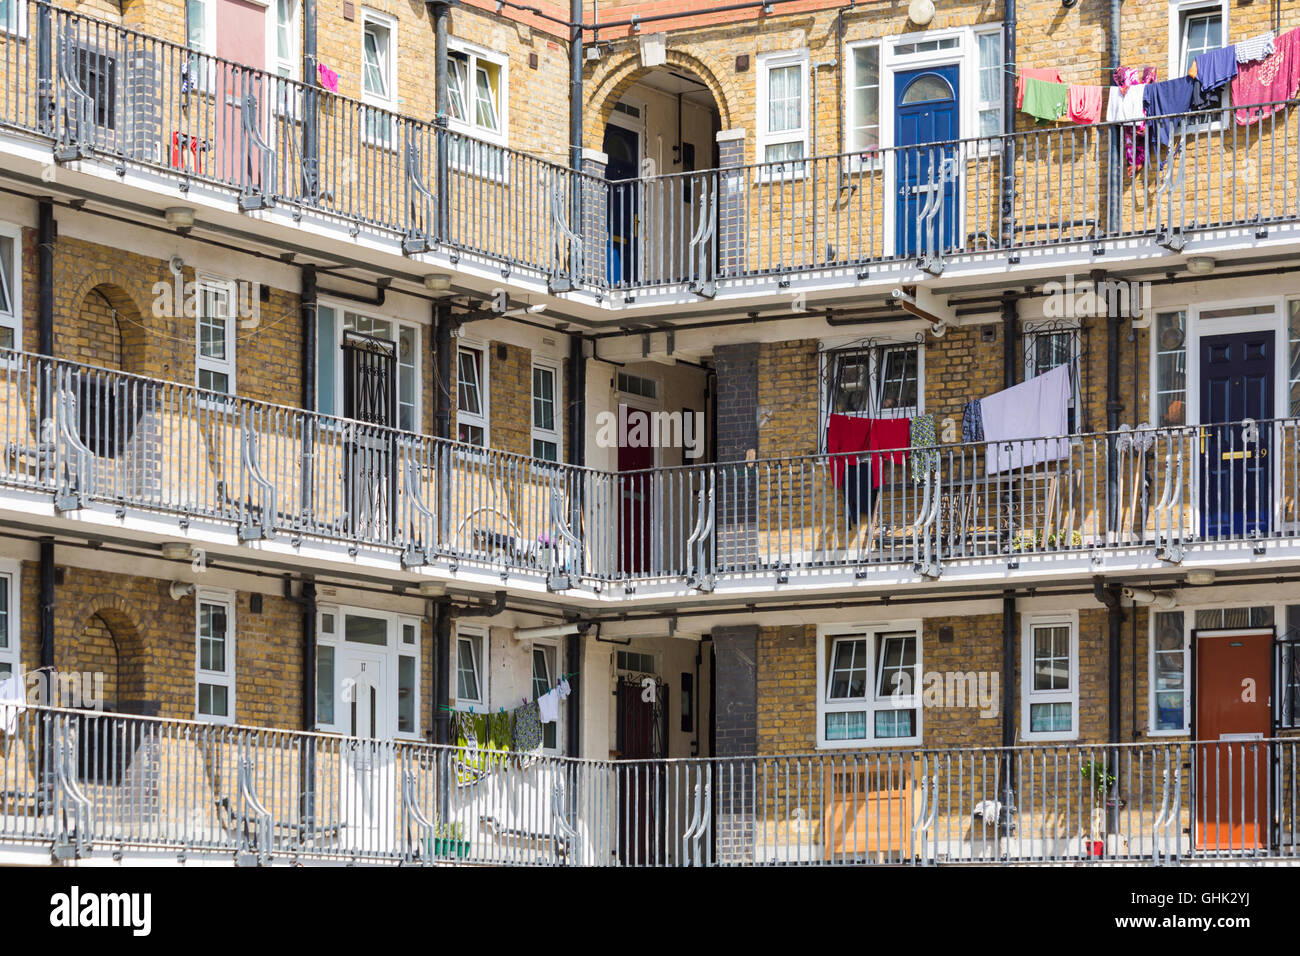 Flats, apartments, social housing, council housing in Bethnal Green area, London UK in July Stock Photo